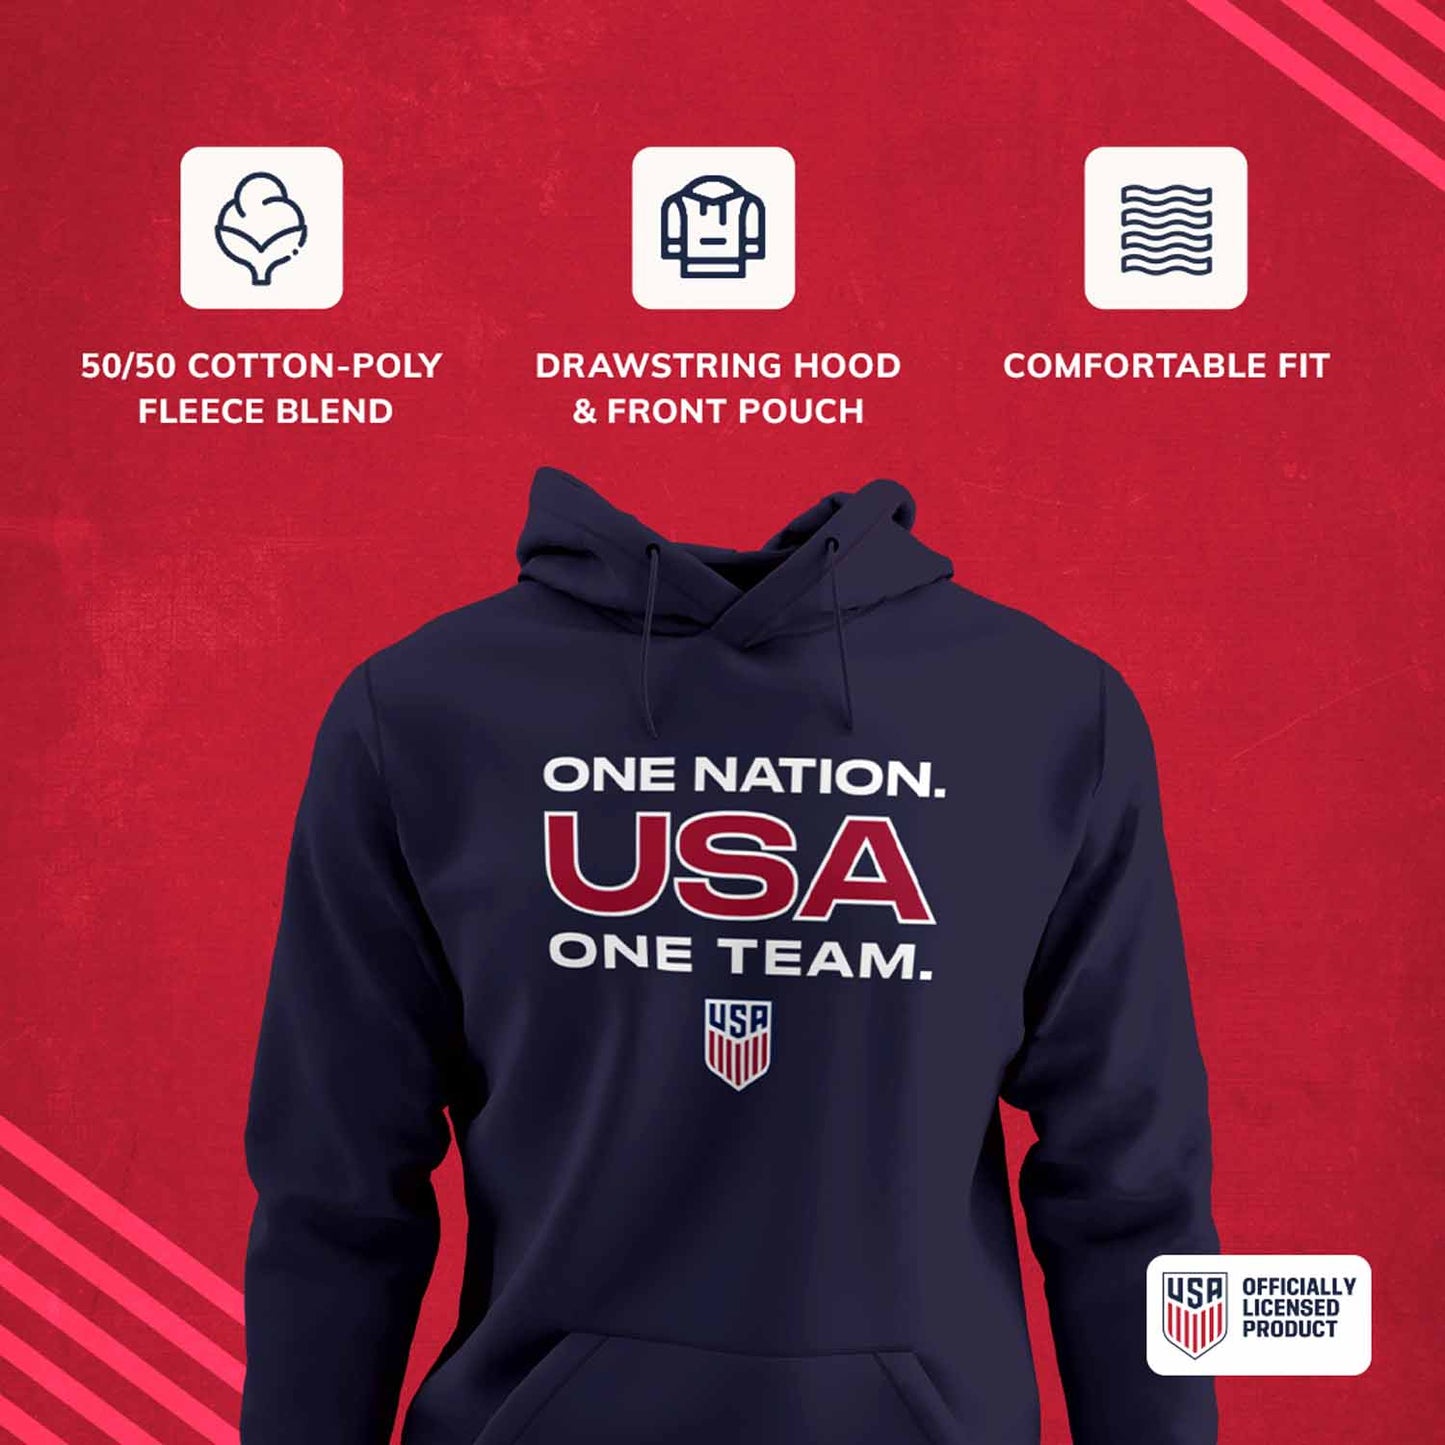 USA National Team The Victory Officially Licensed Unisex Adult US National Soccer Team One Nation One Team Slogan Hooded Sweatshirt - Navy